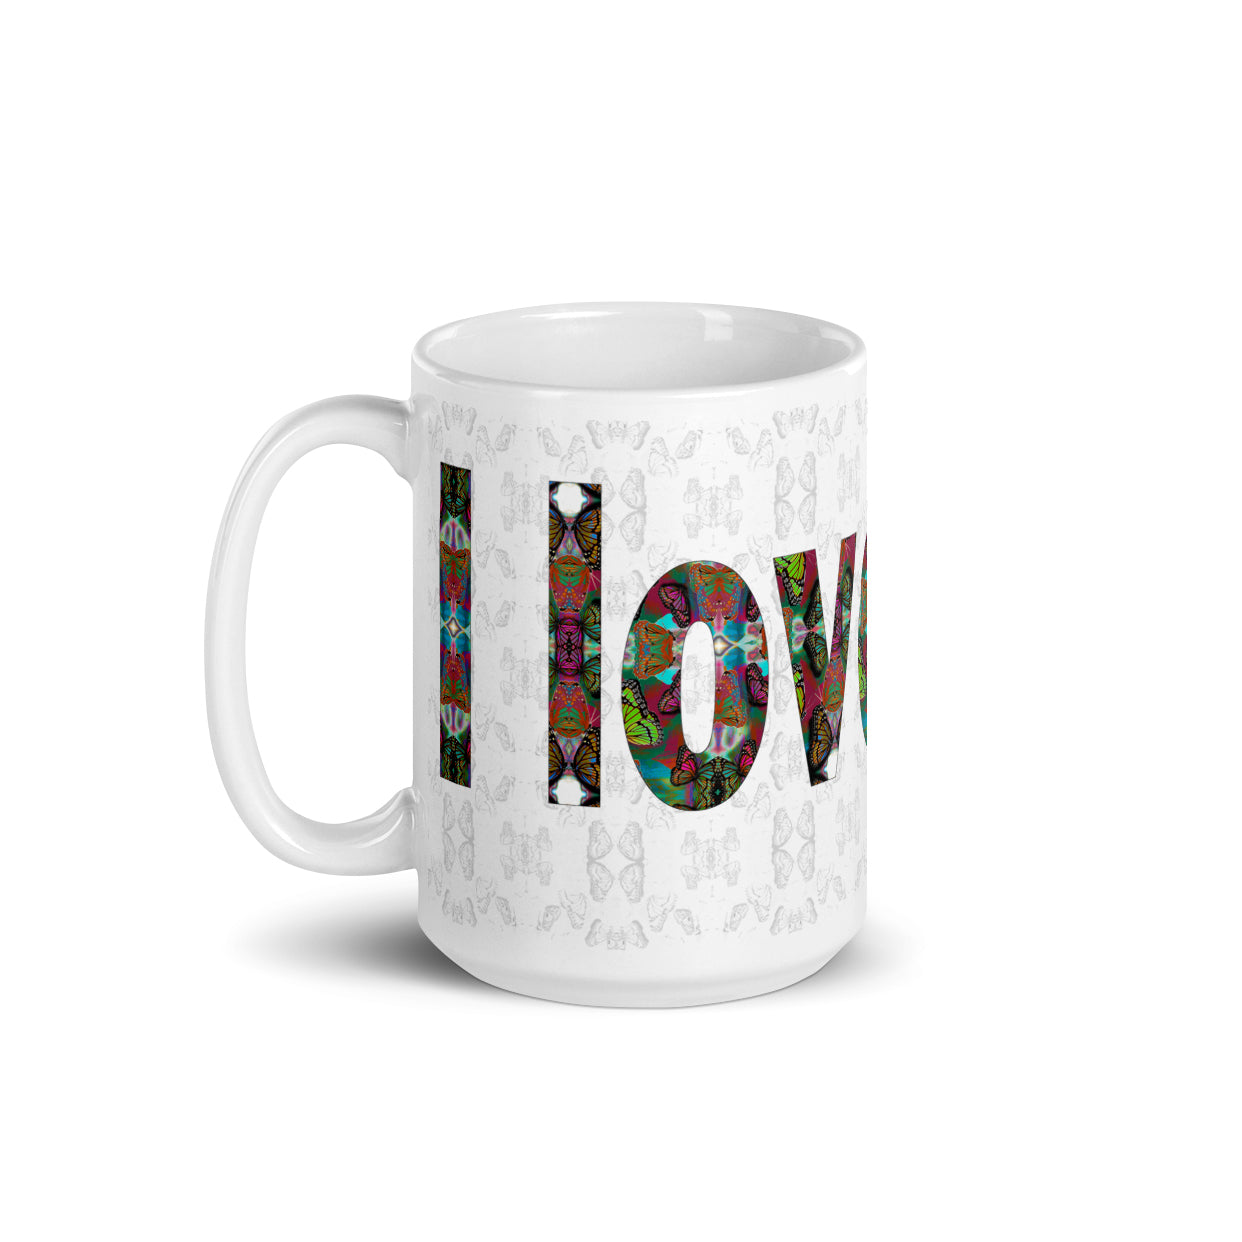 I Love You ~ LOVE ETERNAL Ceramic Mug; Colorful Butterflies Printed Words, Valentine's Day Gift